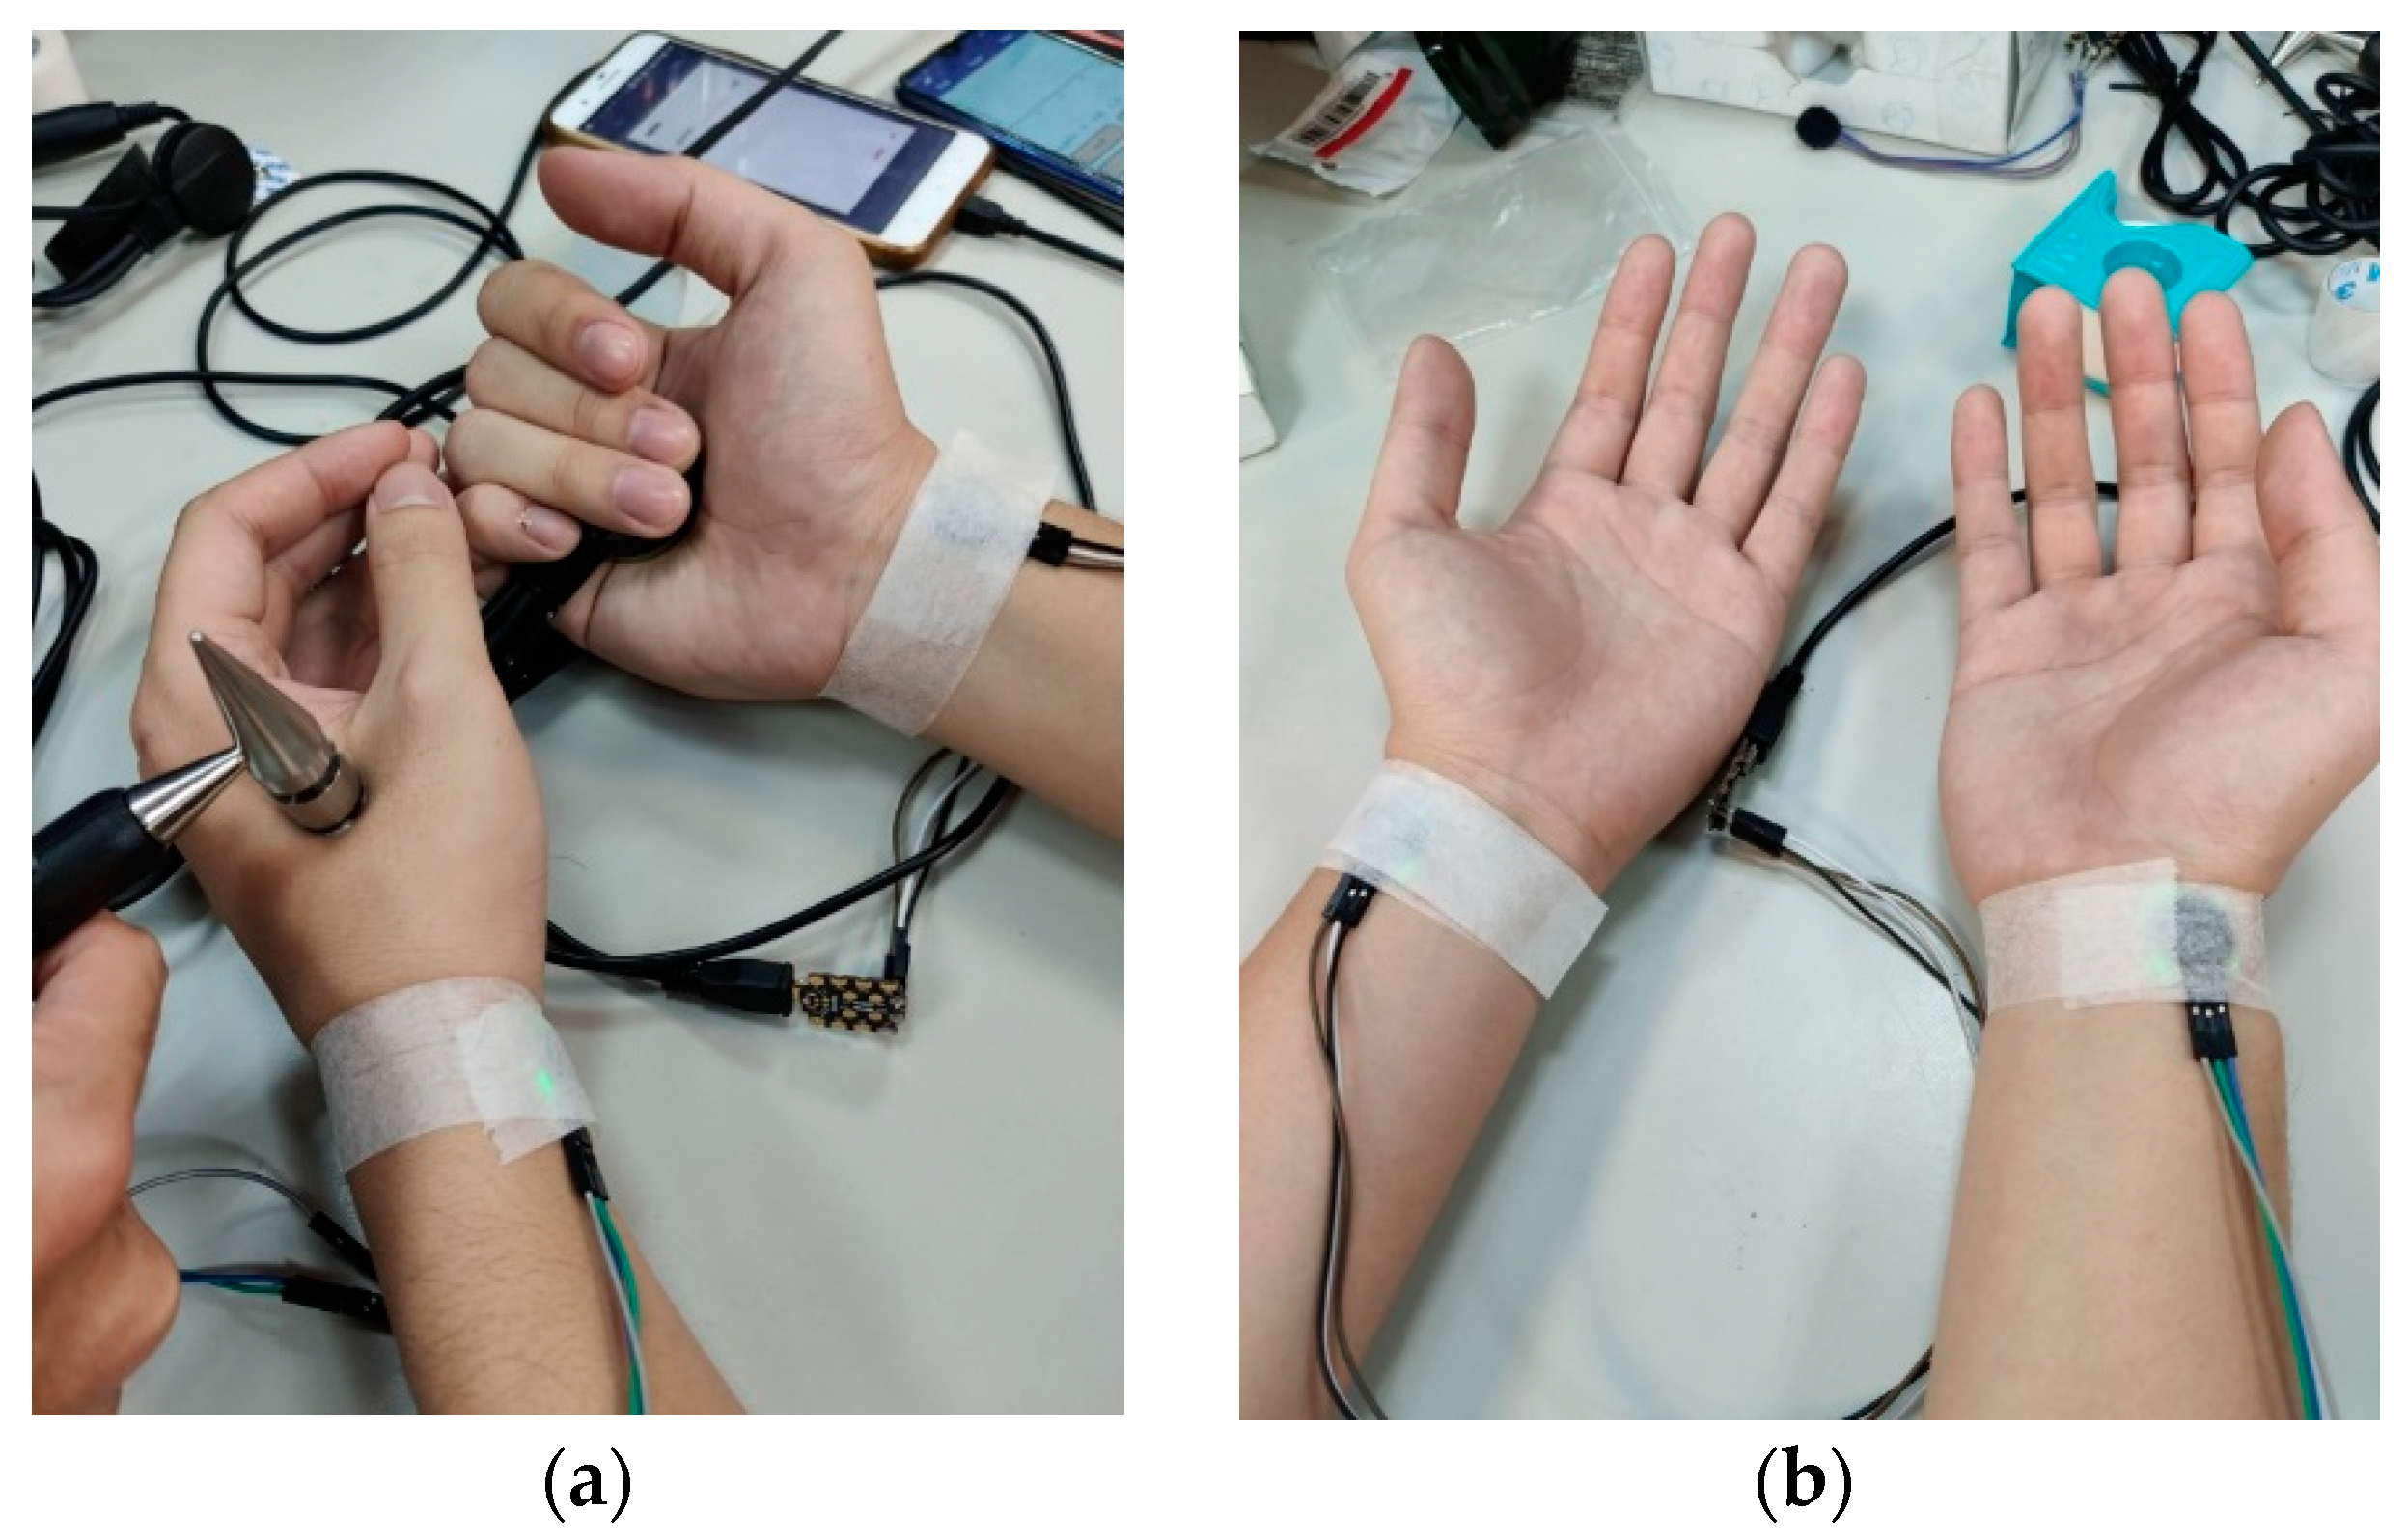 Sensors | Free Full-Text | Traditional Chinese Medicine Pulse Diagnosis on  a Smartphone Using Skin Impedance at Acupoints: A Feasibility Study